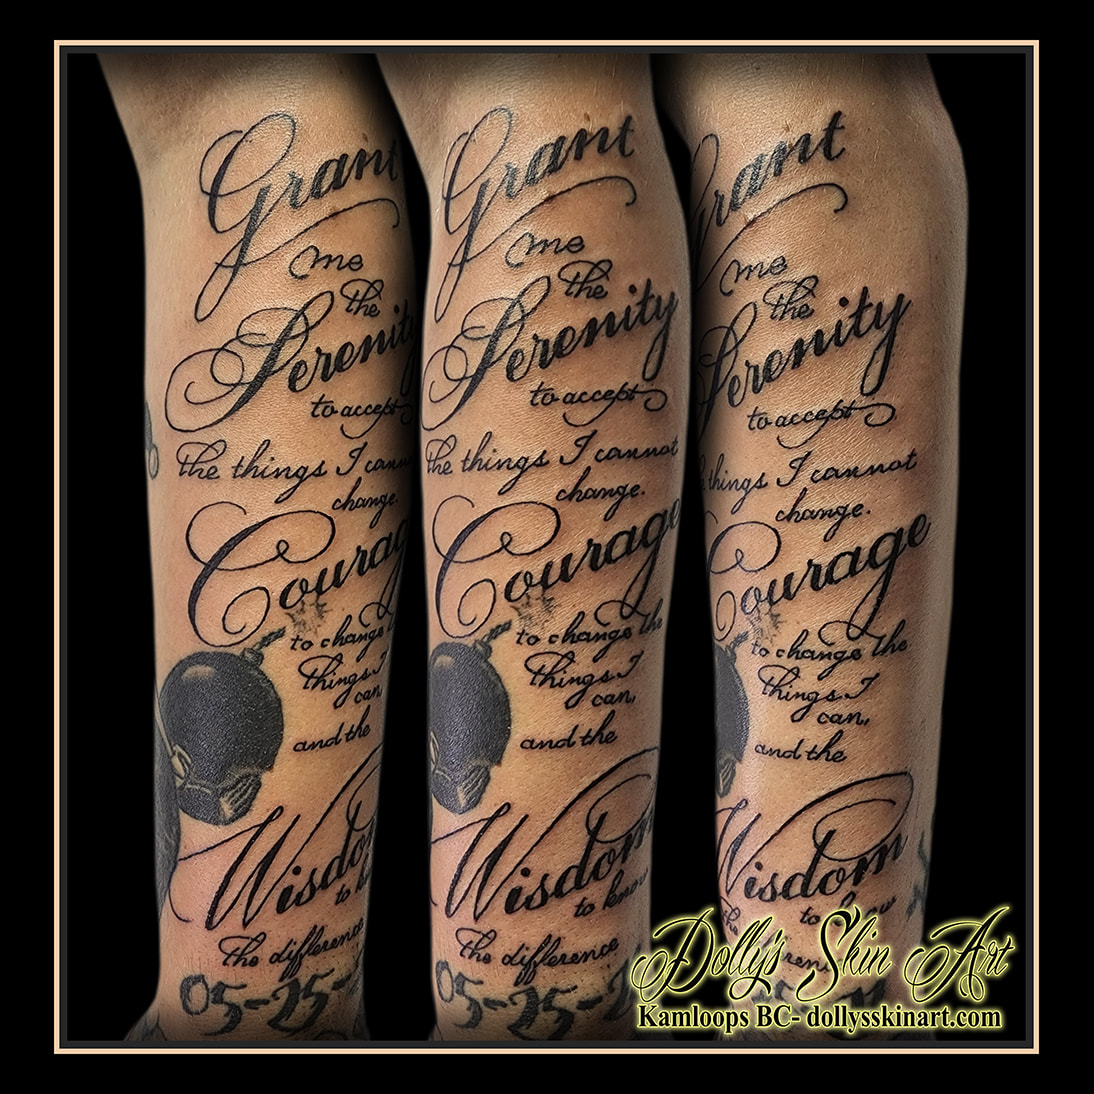 Serenity Prayer tattoo arm lettering font script black God Grant Me The Serenity To accept the things I cannot change Courage to change the things I can And wisdom to know the difference tattoo dolly's skin art kamloops